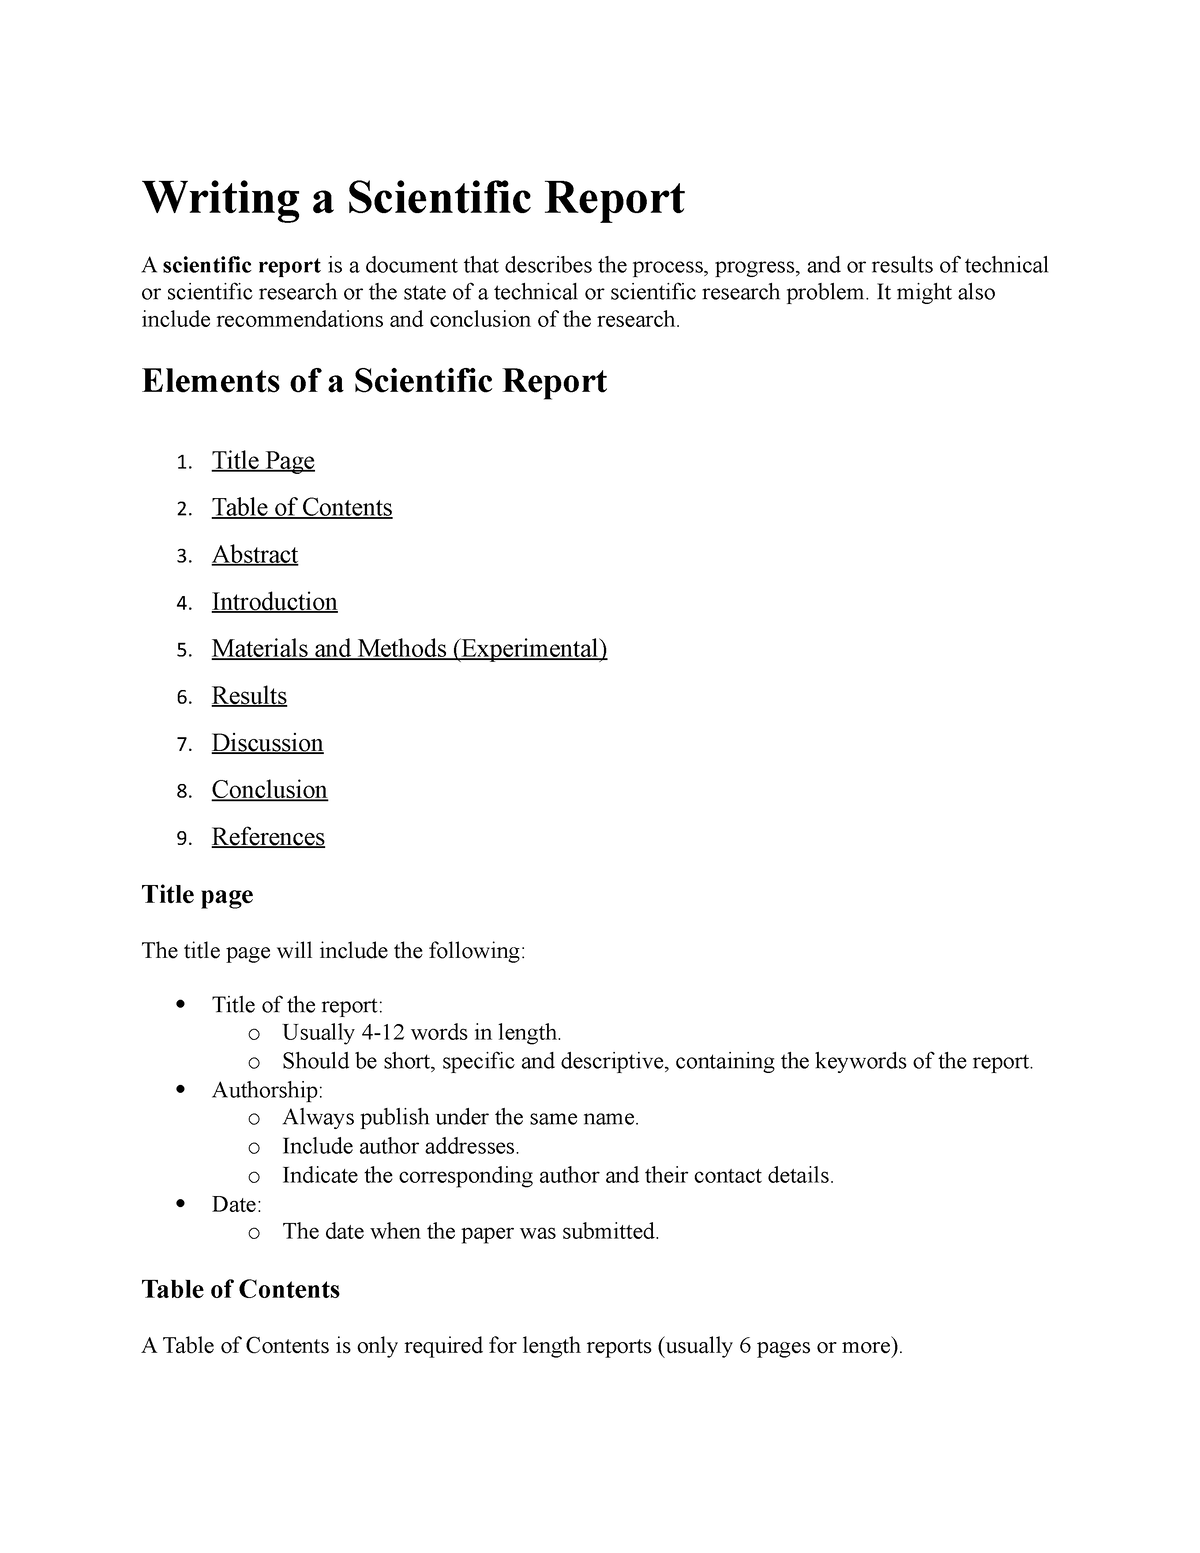 steps of writing a scientific report